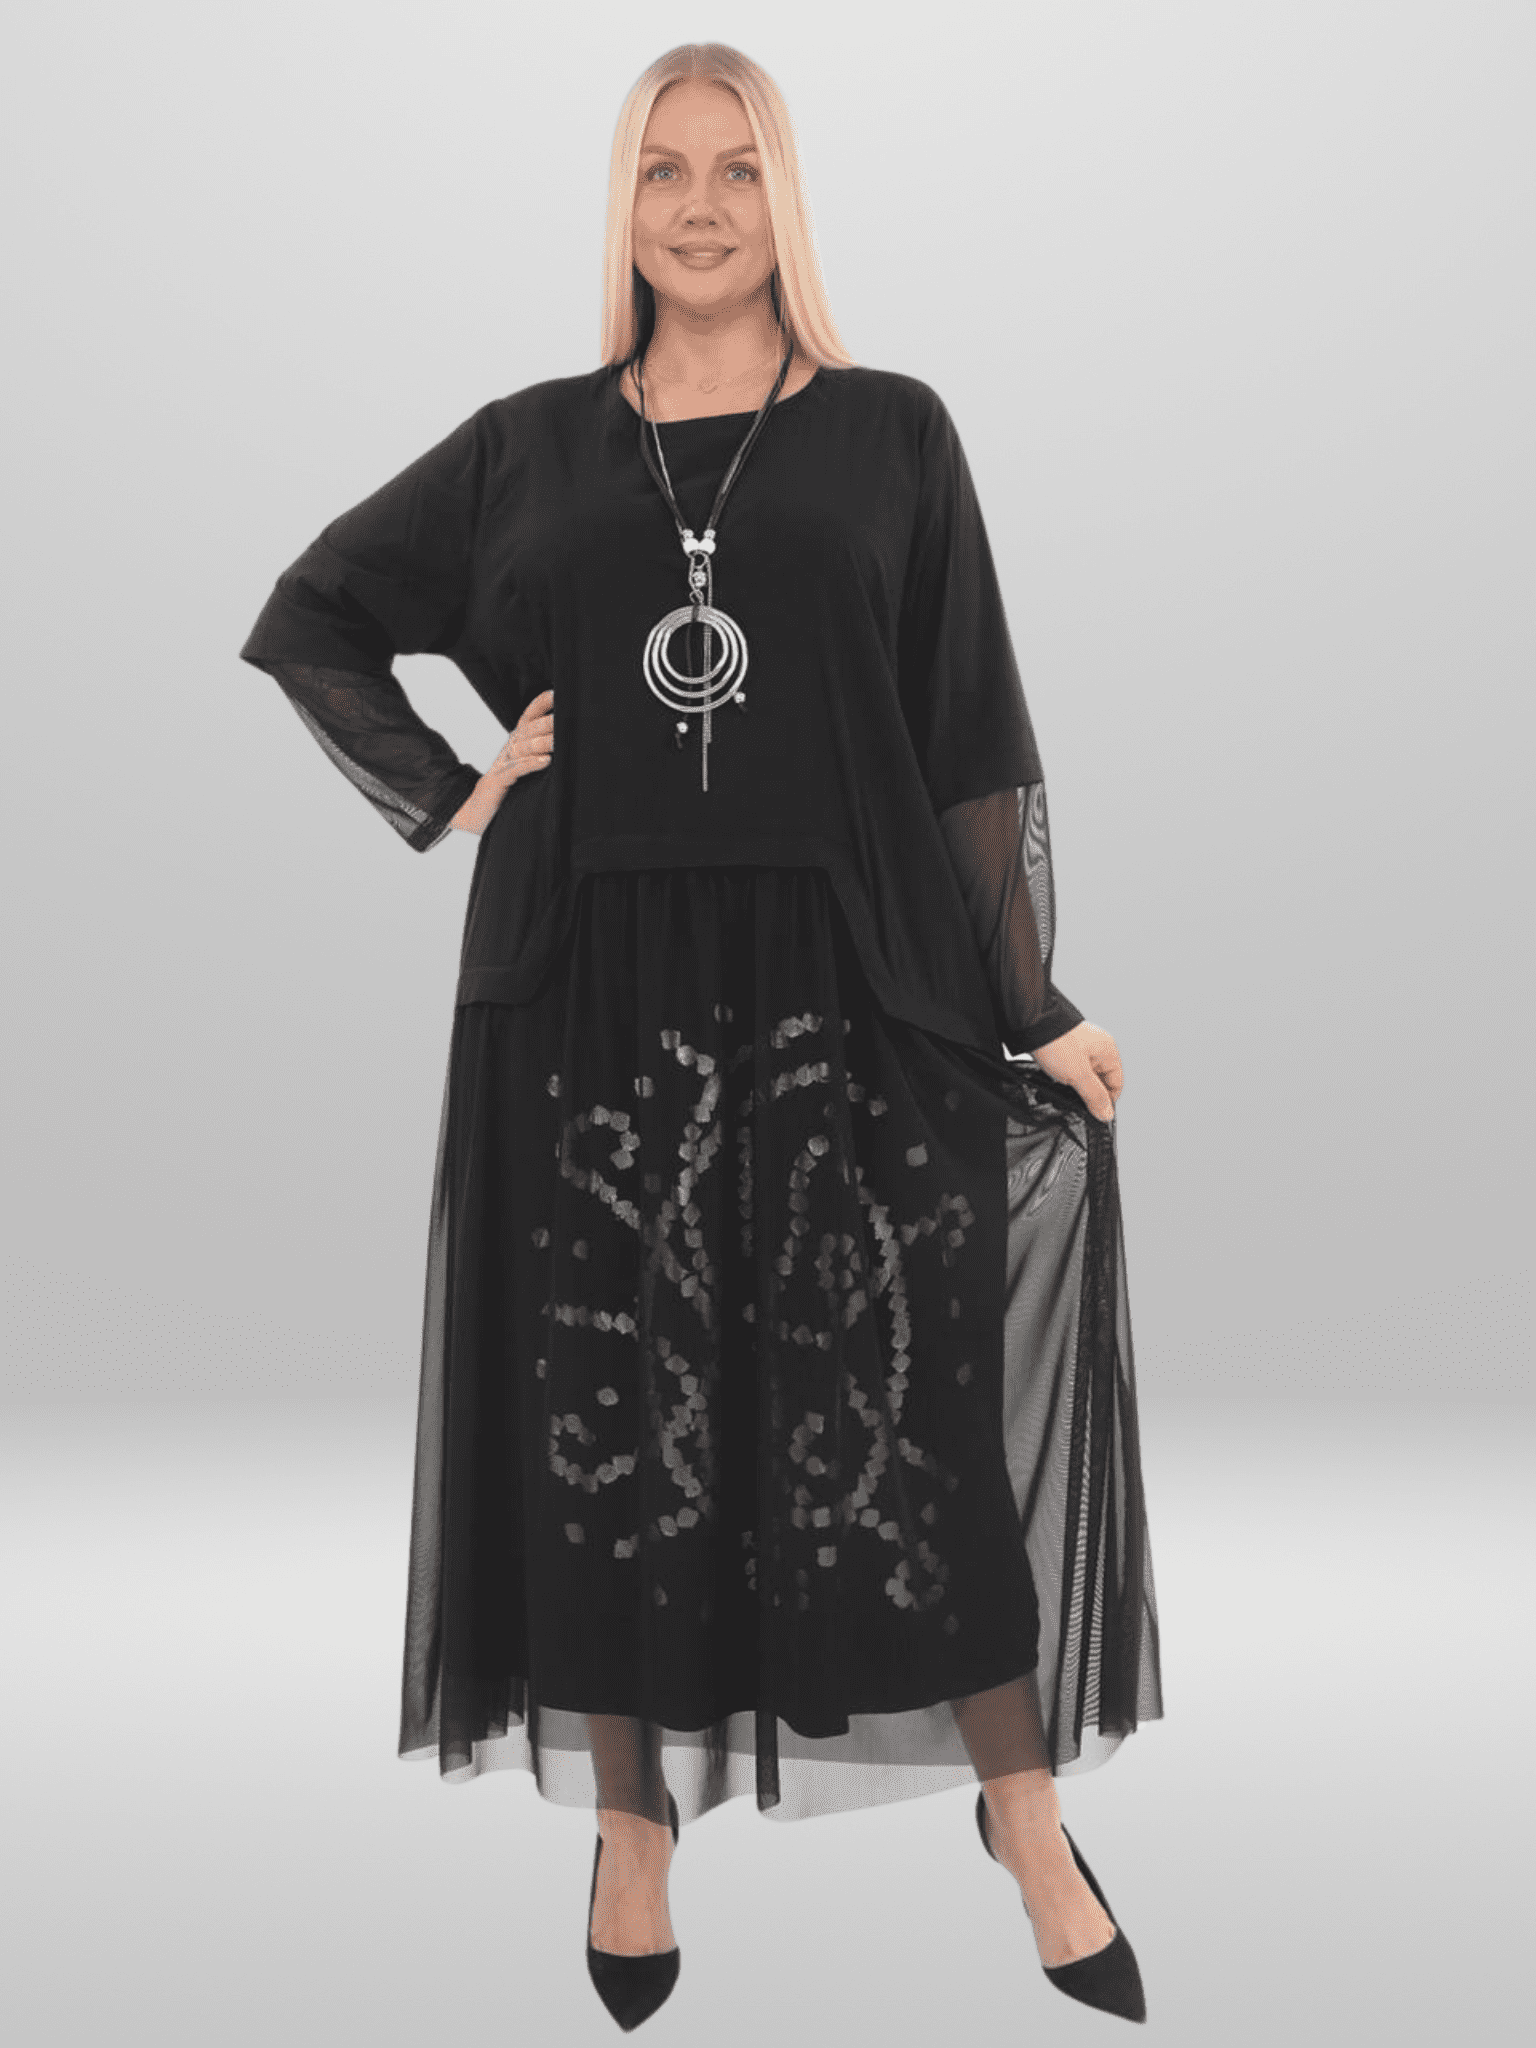 Get ready to turn heads in this stunning Divas Plus Size Dress. With a sleek silhouette and flattering fit, this dress is perfect for any occasion. Available in sizes 22/24, 24-26, and 26/28, it features a bust, waist, hip, collar, shoulder, sleeve, front length, and back length measurements. Made for comfort and style, this dress is a must-have for any plus size fashionista. Shop now and elevate your wardrobe with this sophisticated piece.